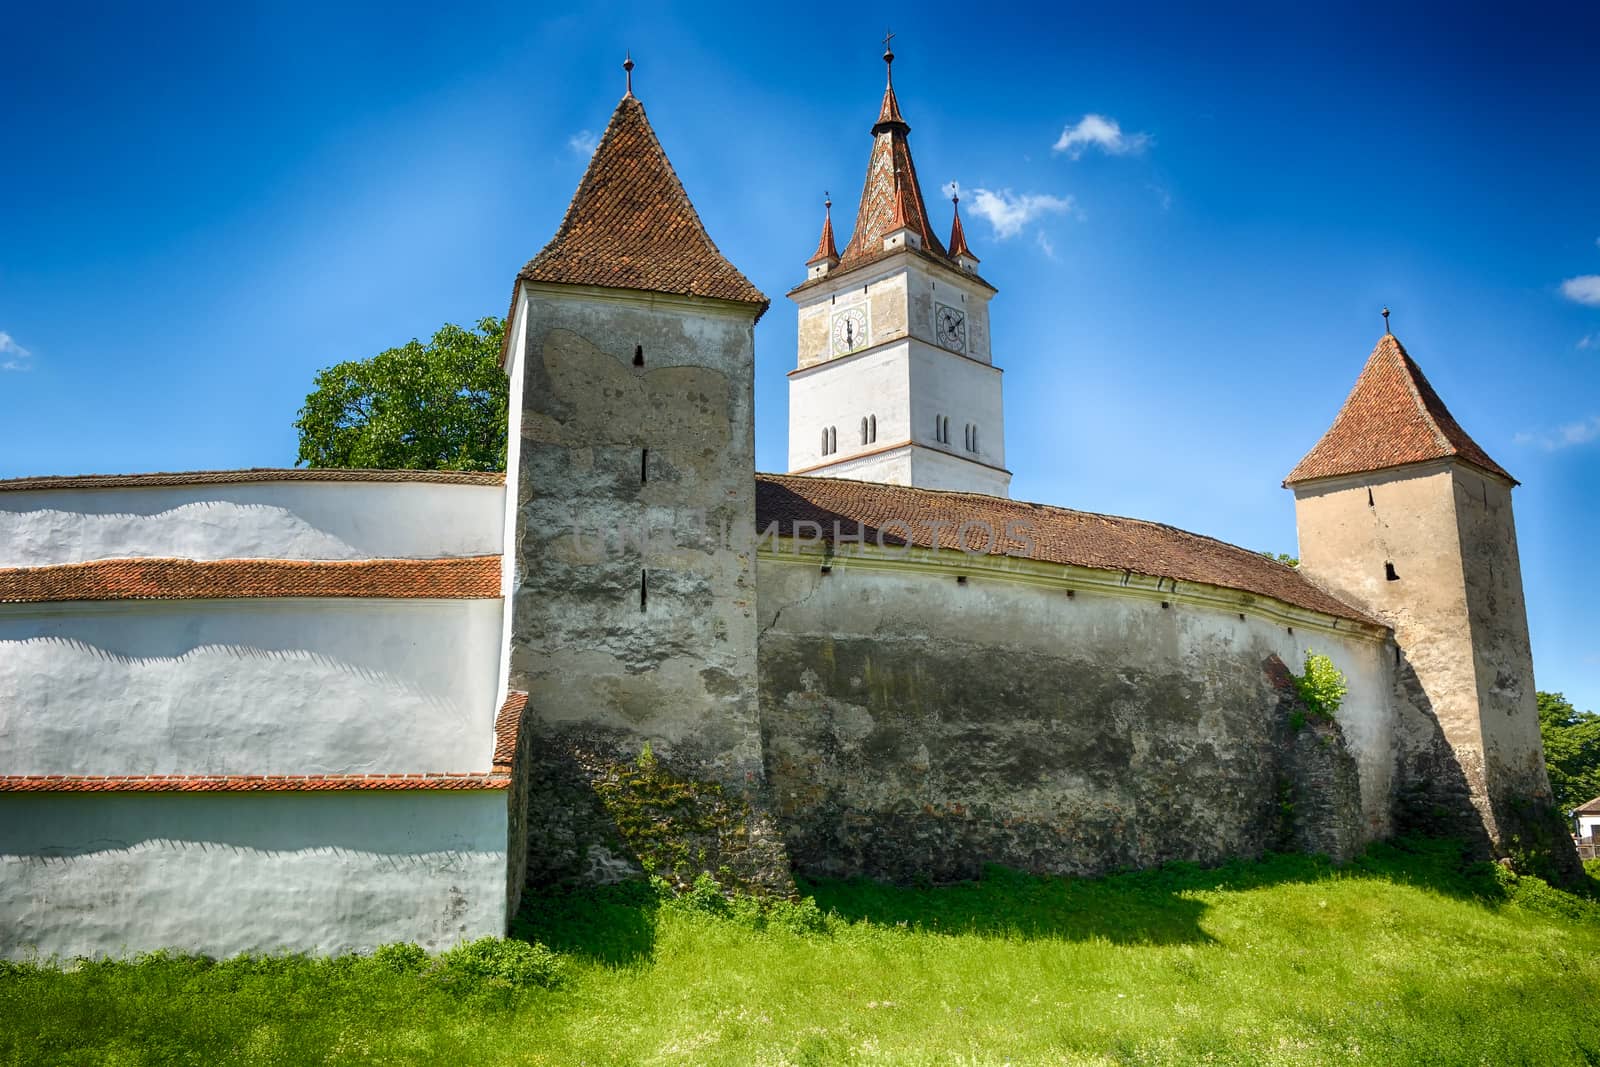 Harman, the Fortified Church, (in Brasov County), which was built in the first half of the 12th century, following the great Mongolian invasion in 1241.